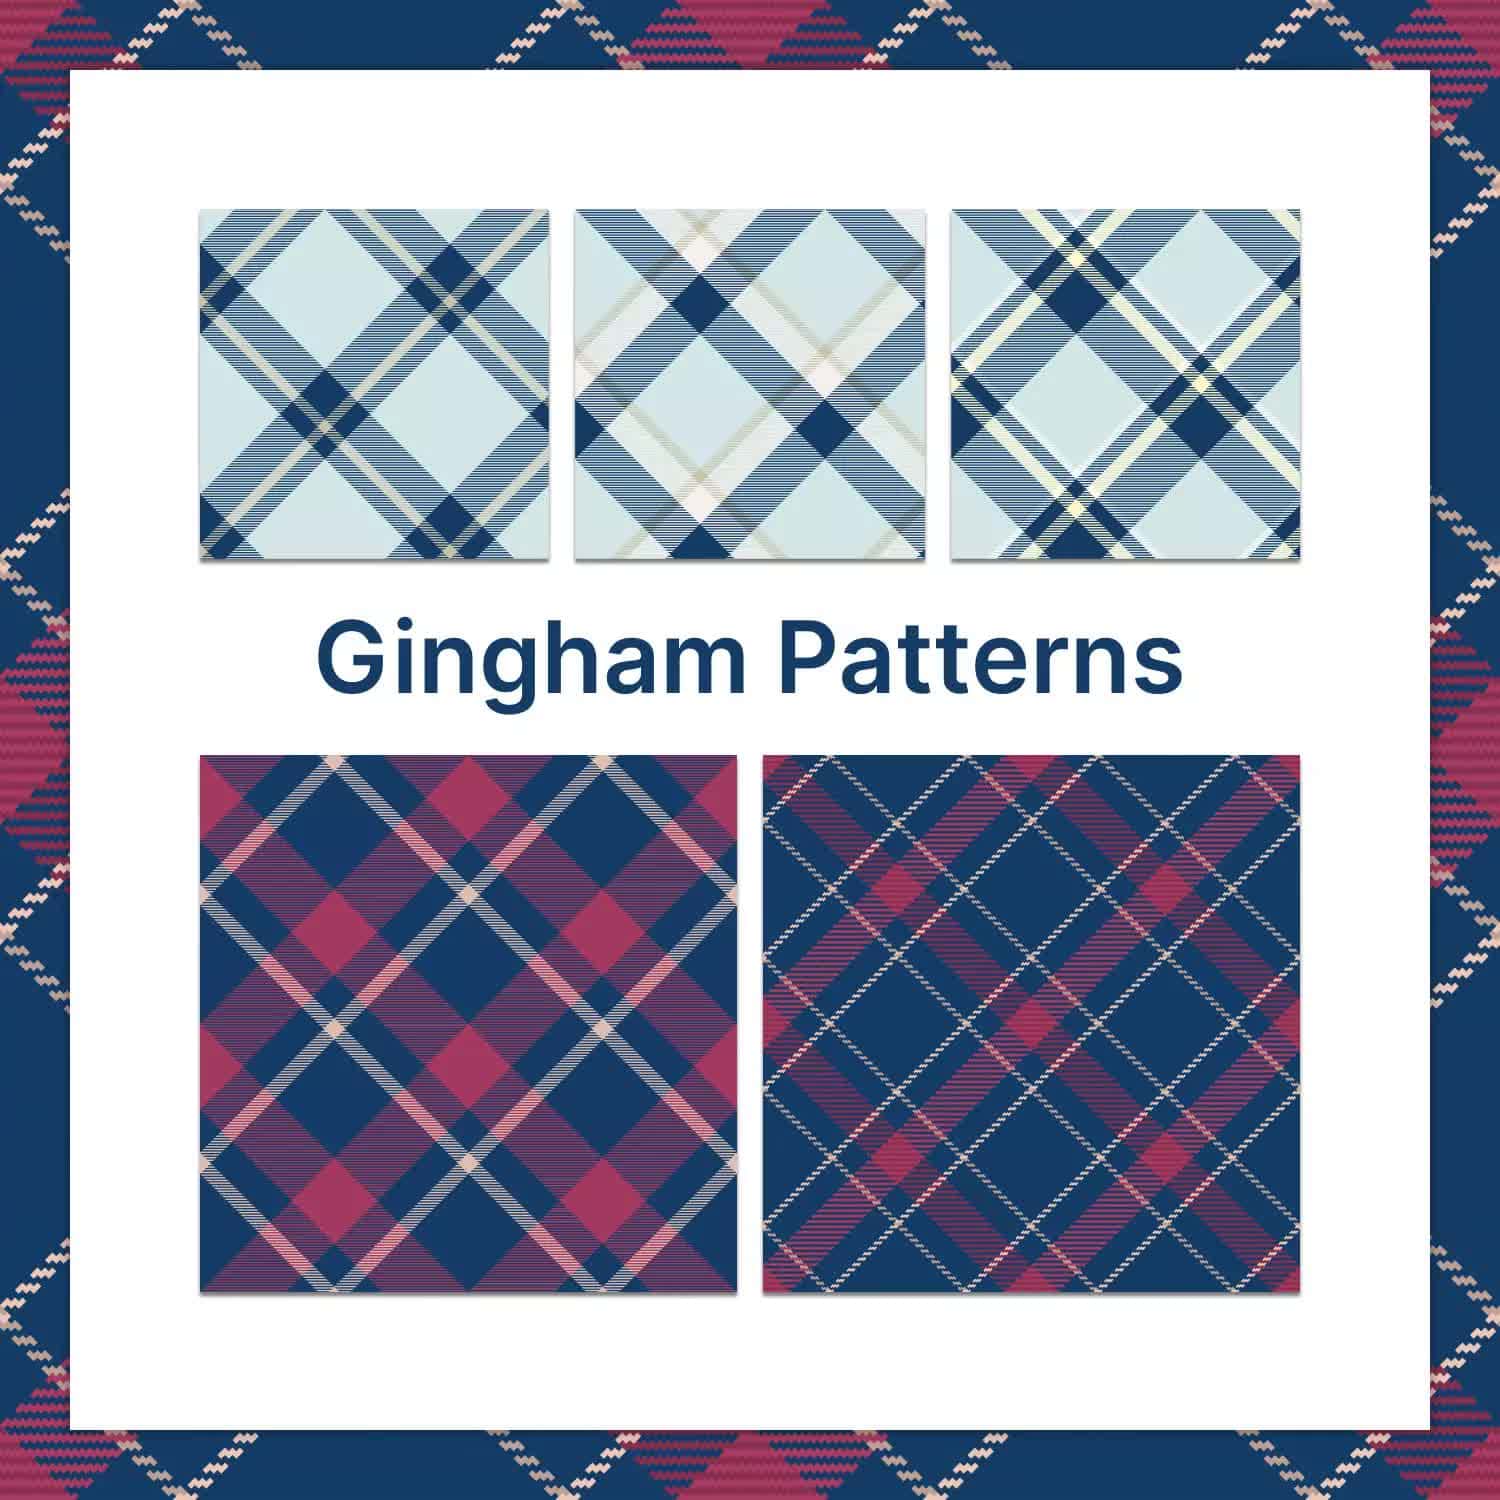 Gingham Patterns Preview 2.